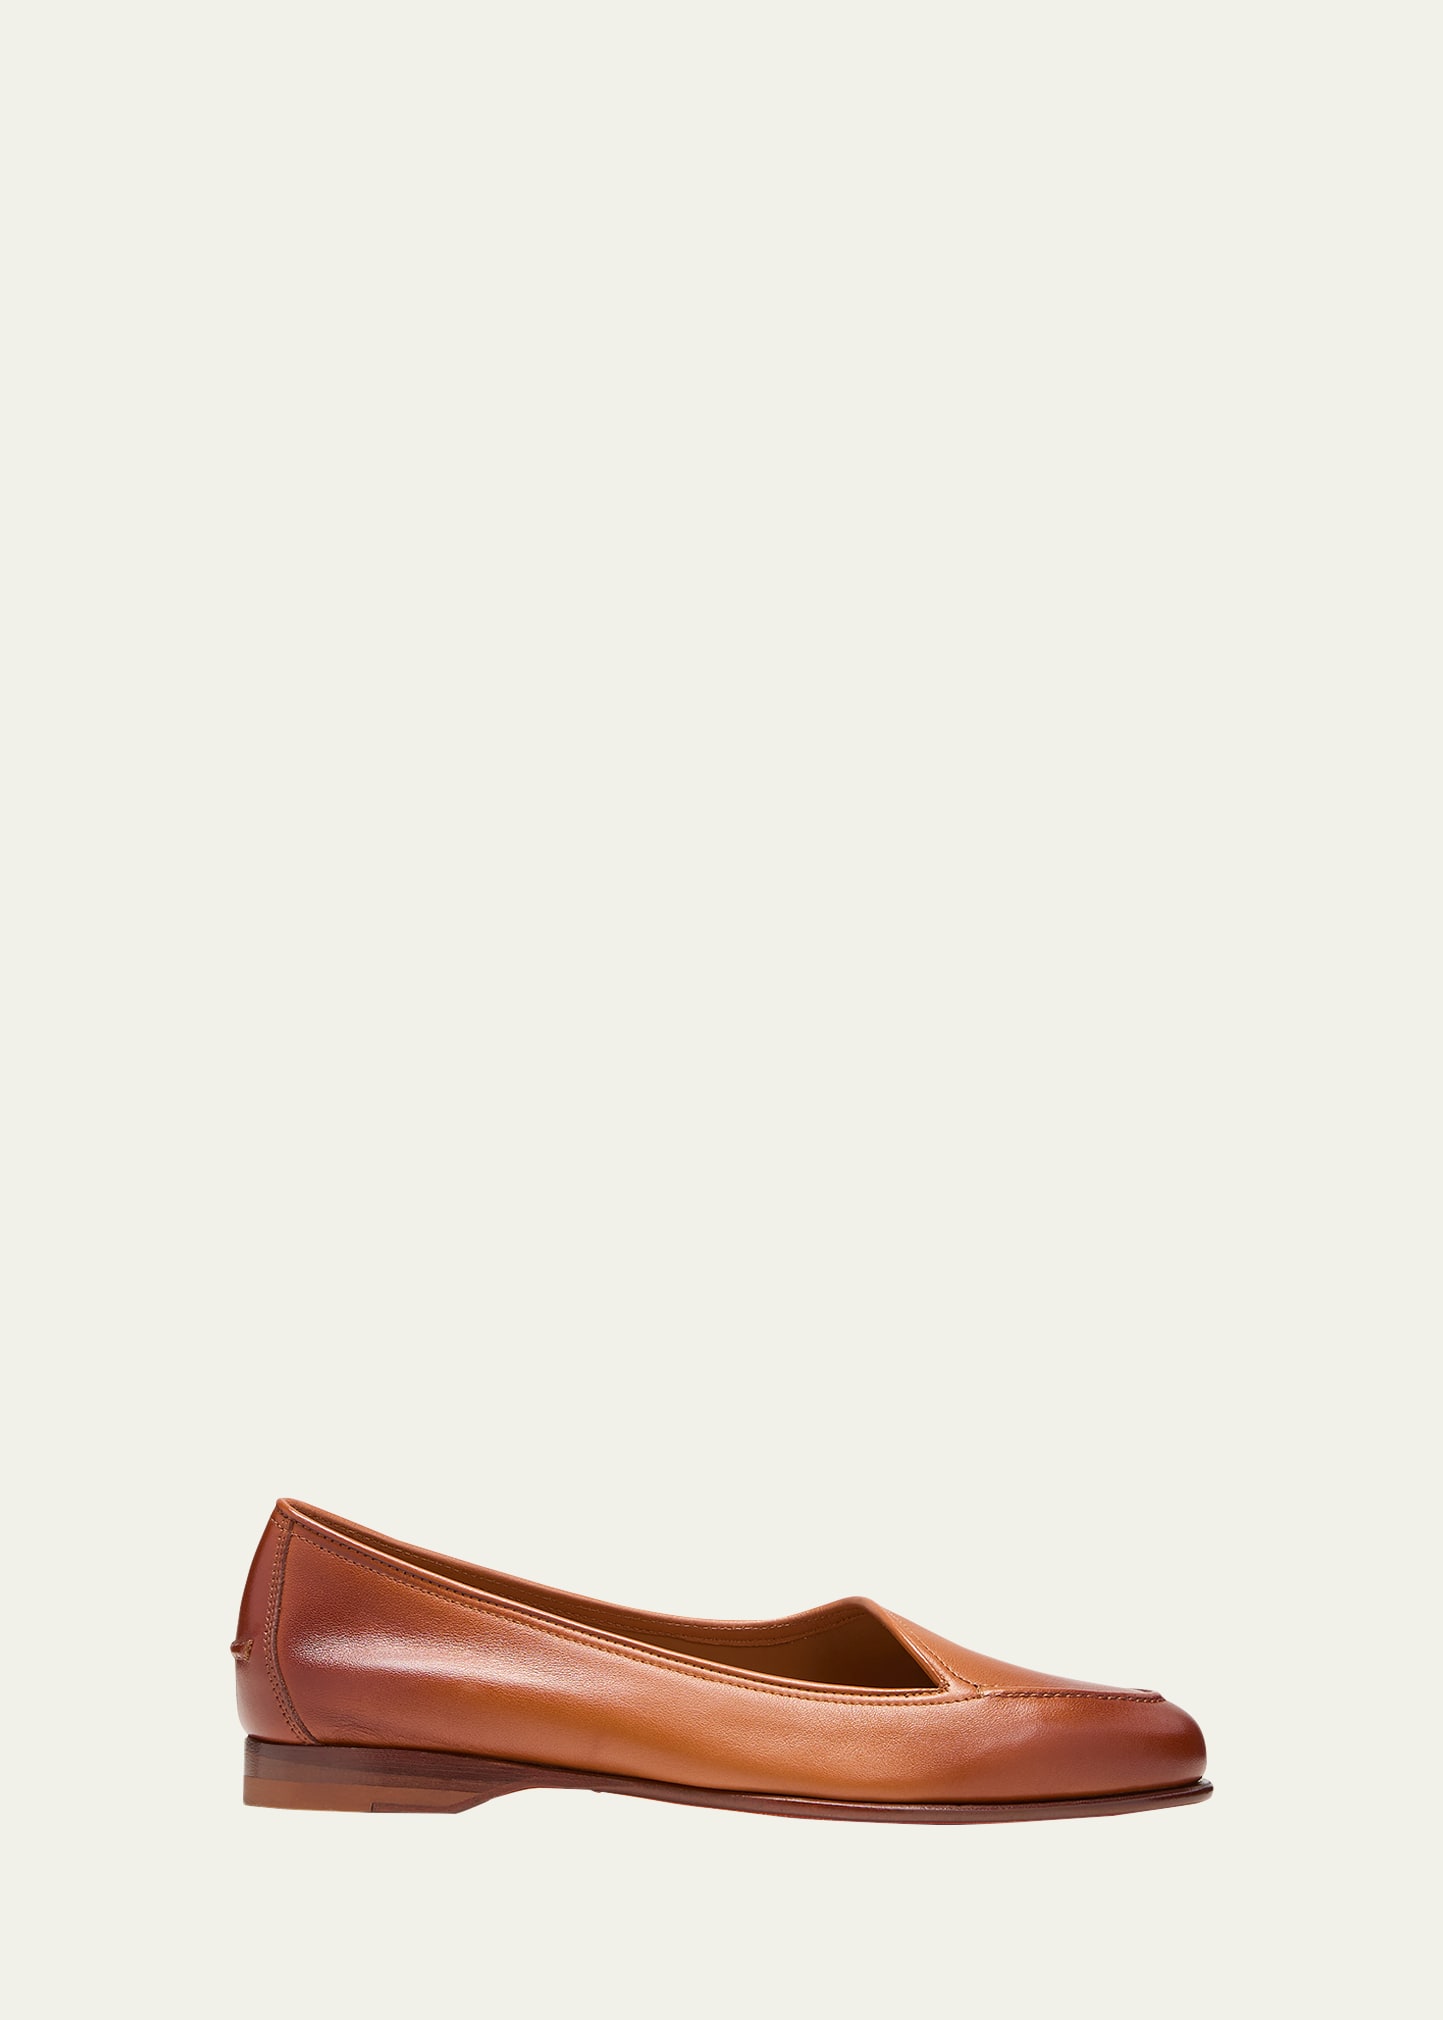 Andreaw Asymmetrical Leather Ballerina Loafers